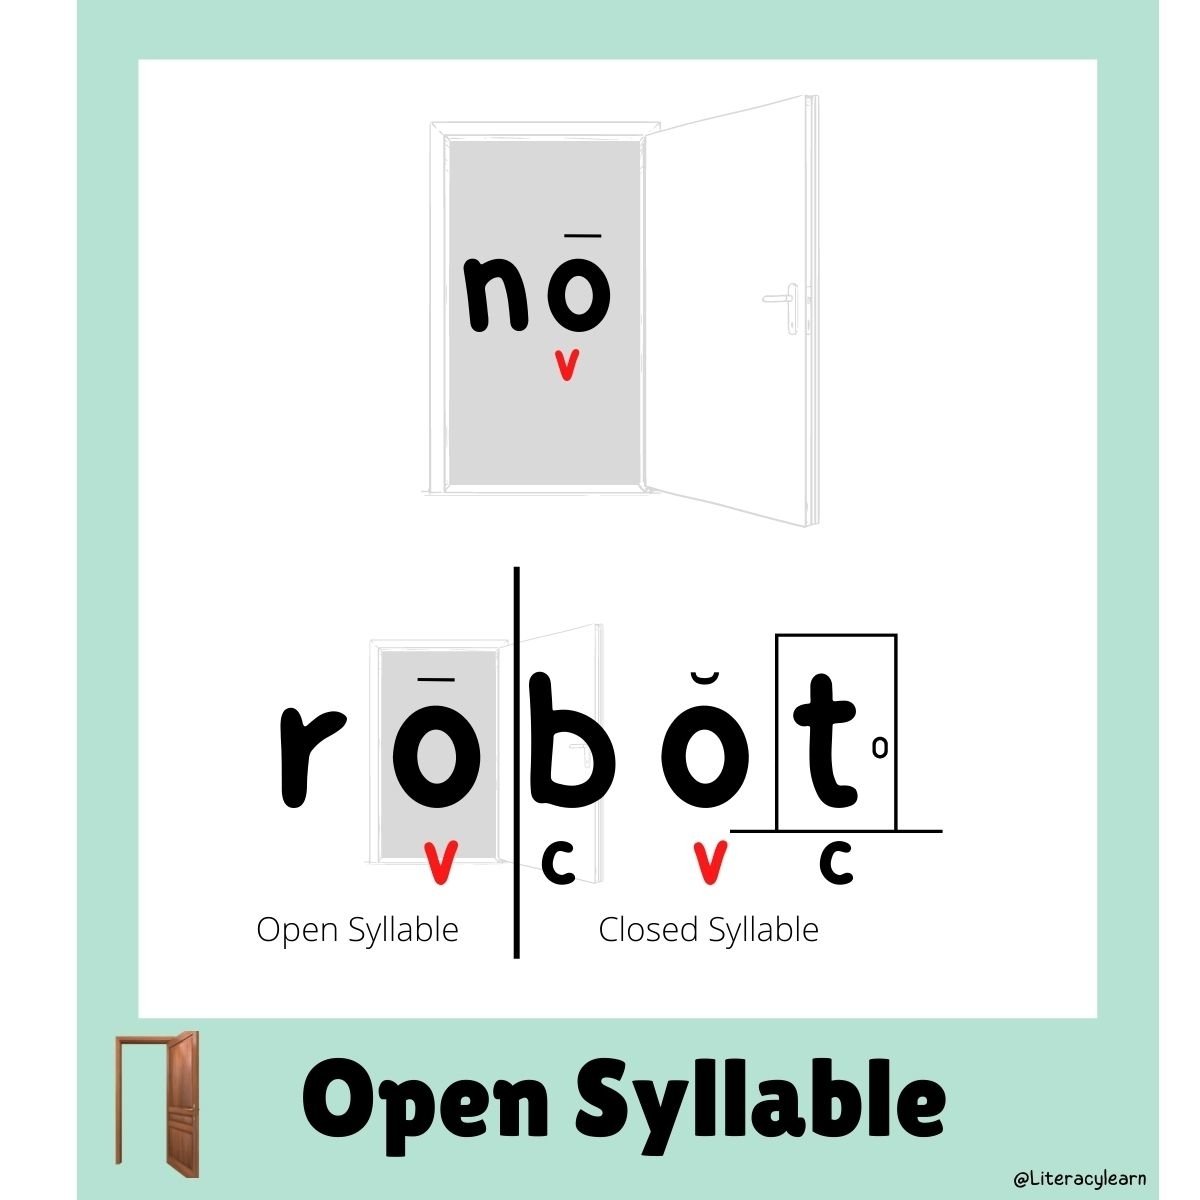 Green graphic with words "no, robot" showing open syllable words.